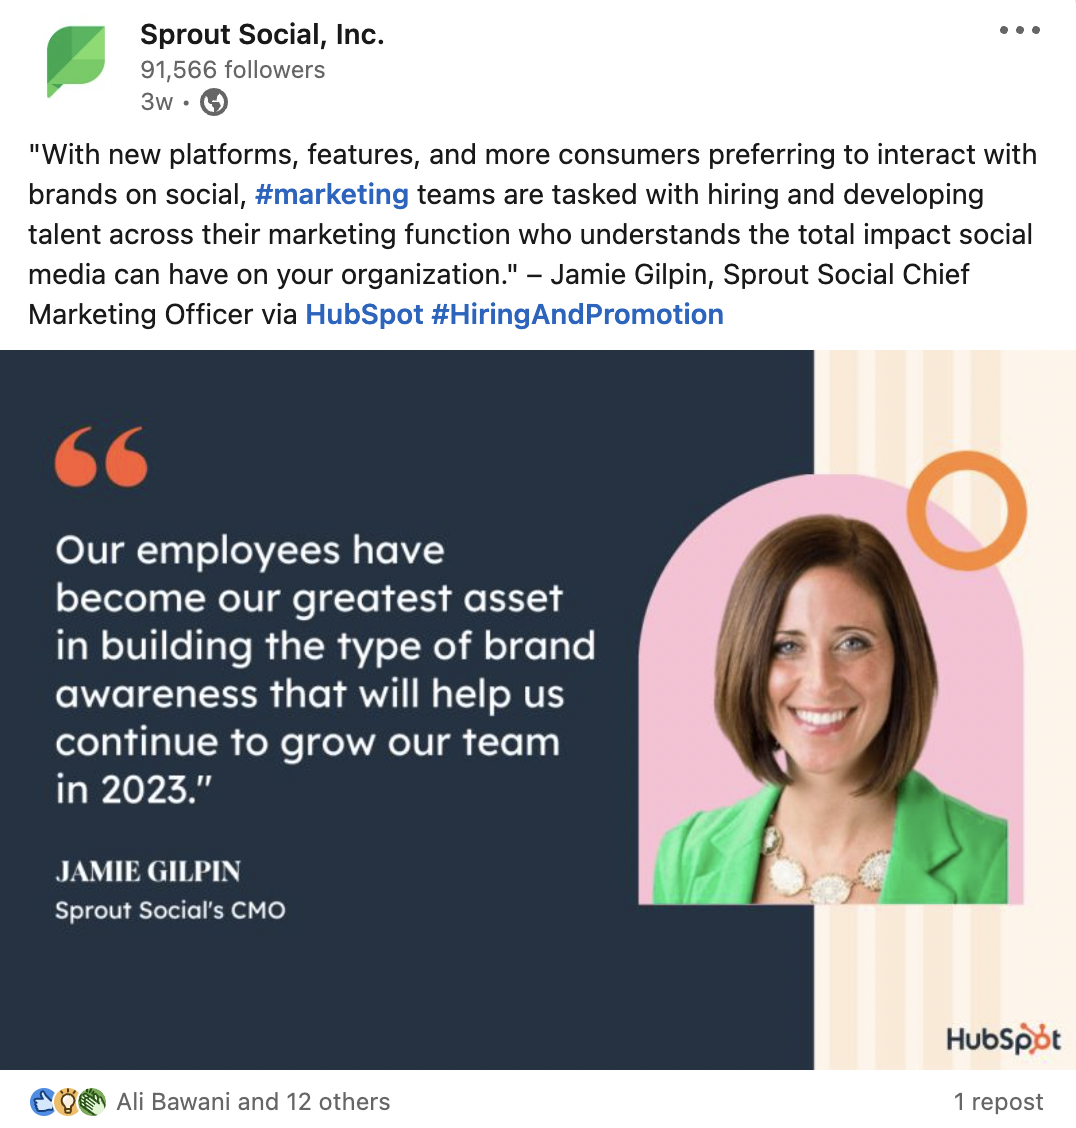 A screenshot of a Sprout Social LinkedIn post discussing the power of employee advocacy.